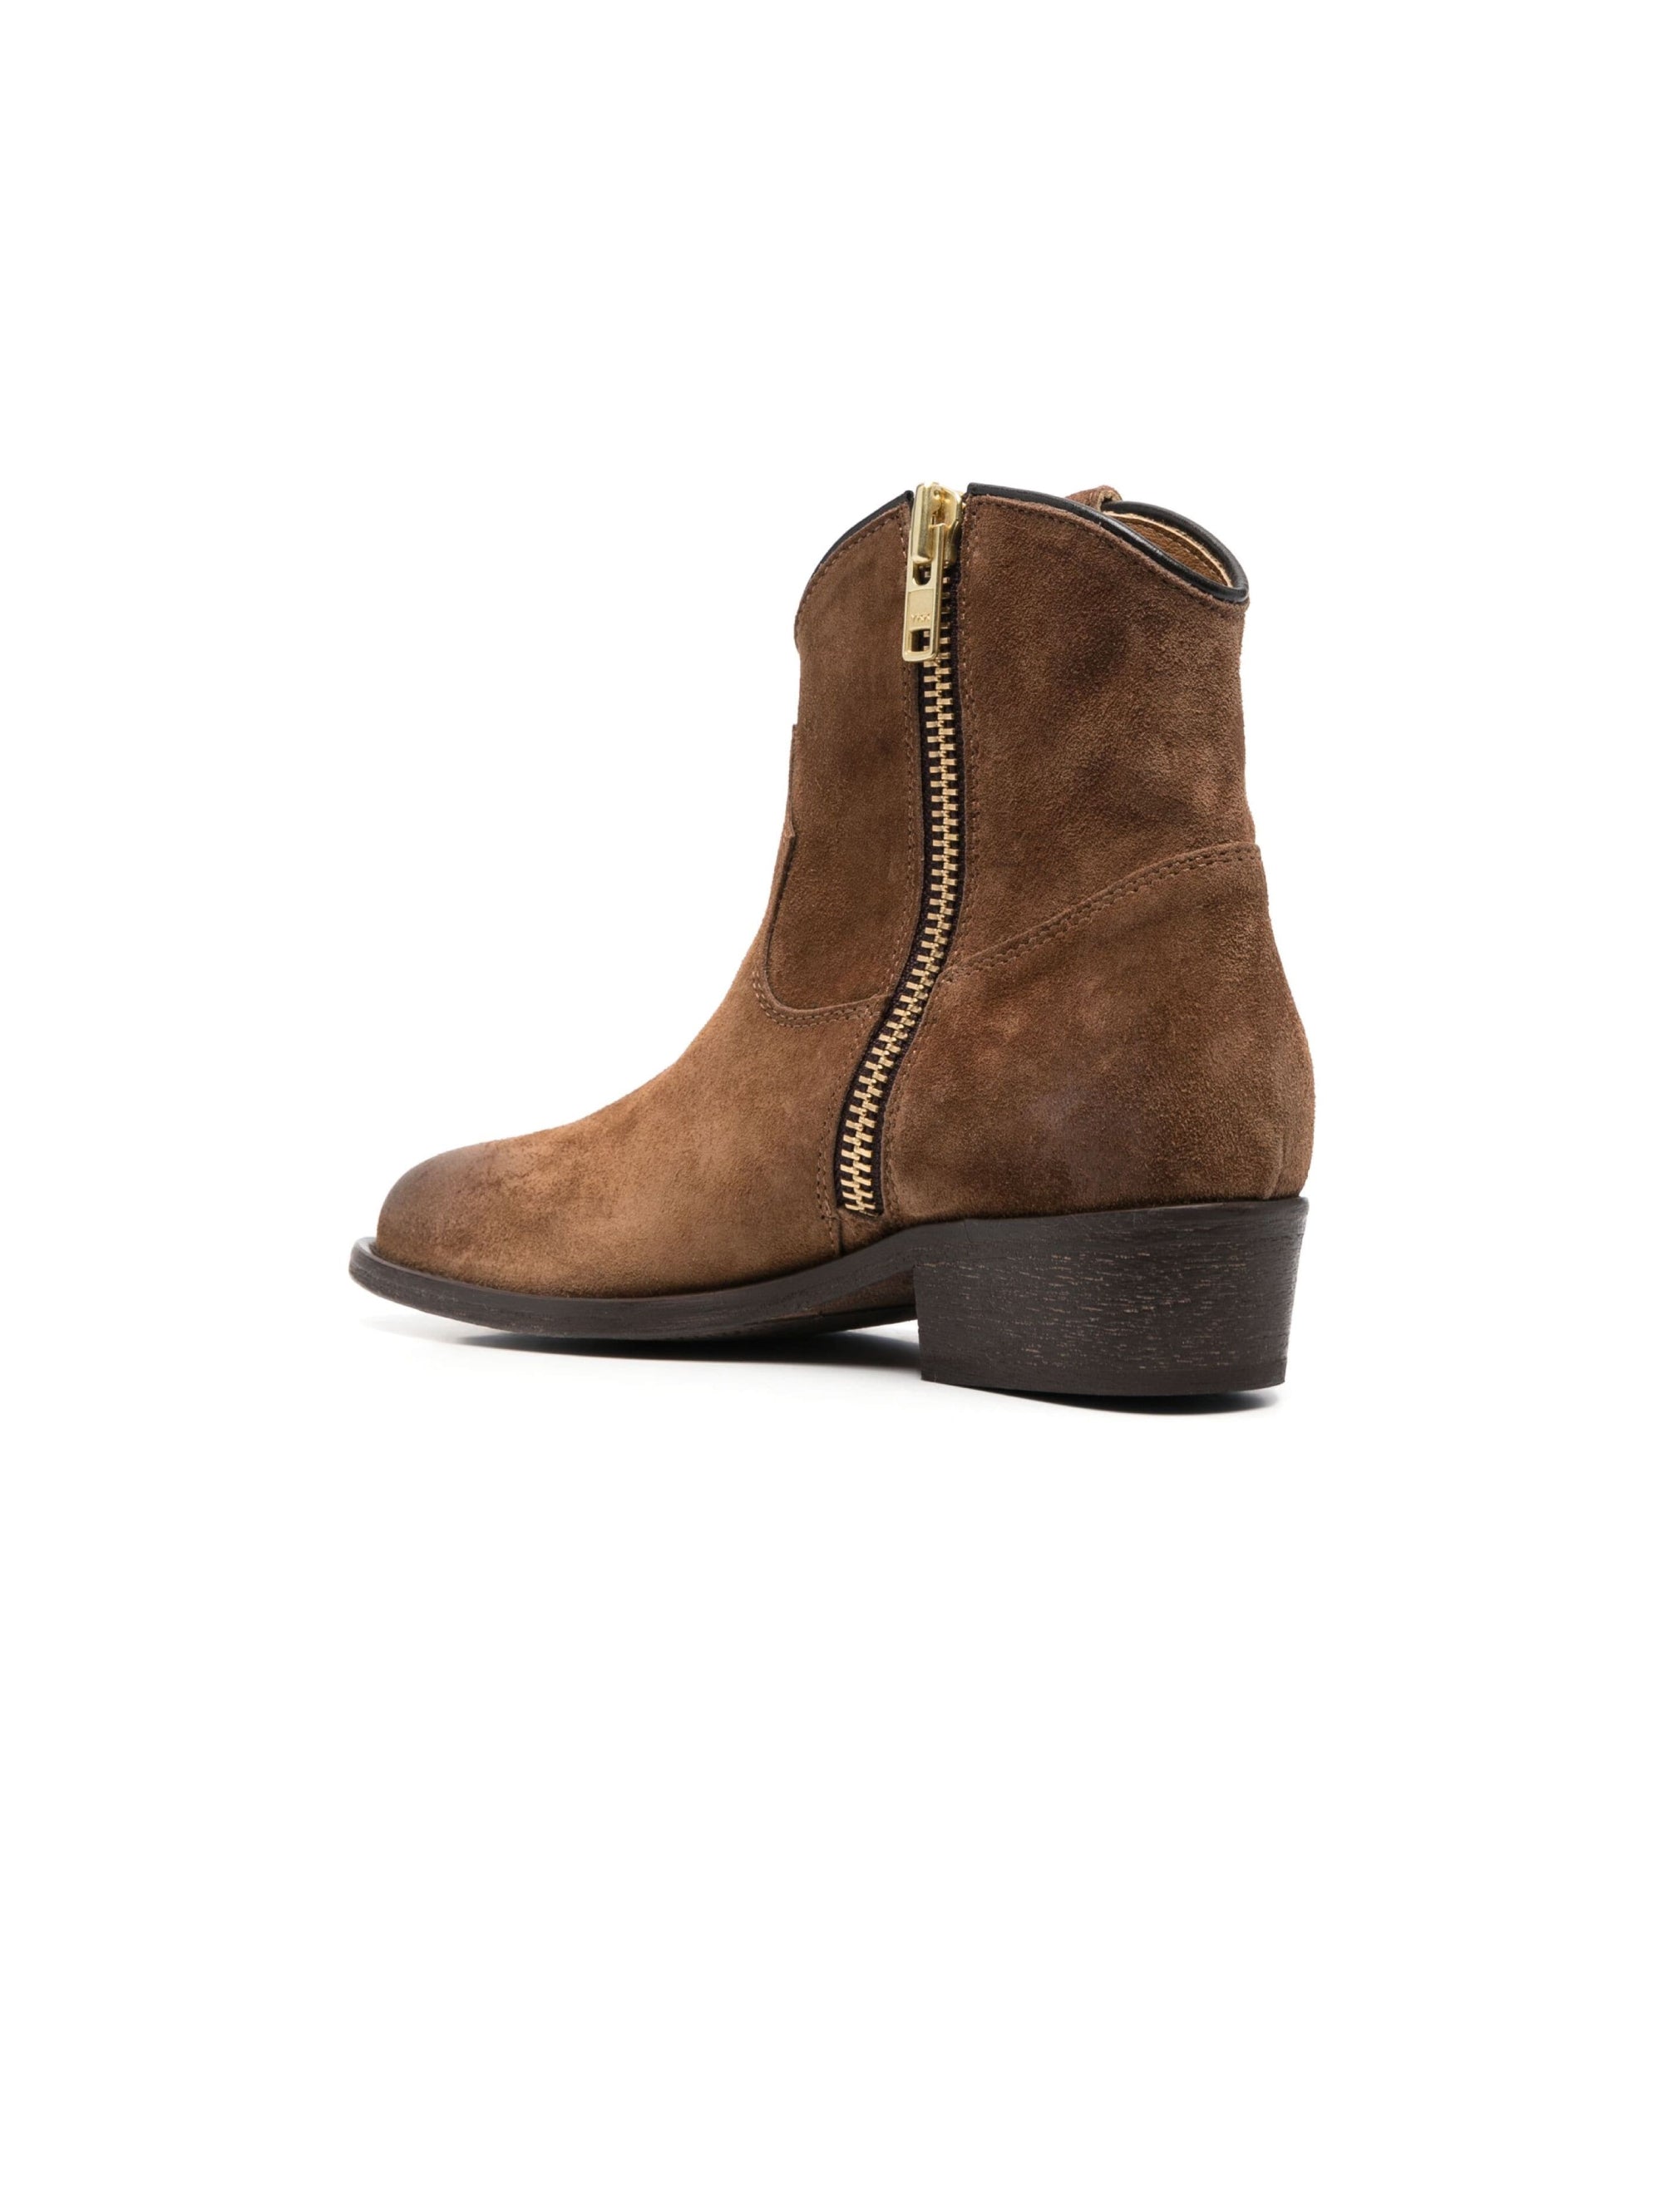 Texan ankle boots in marten suede